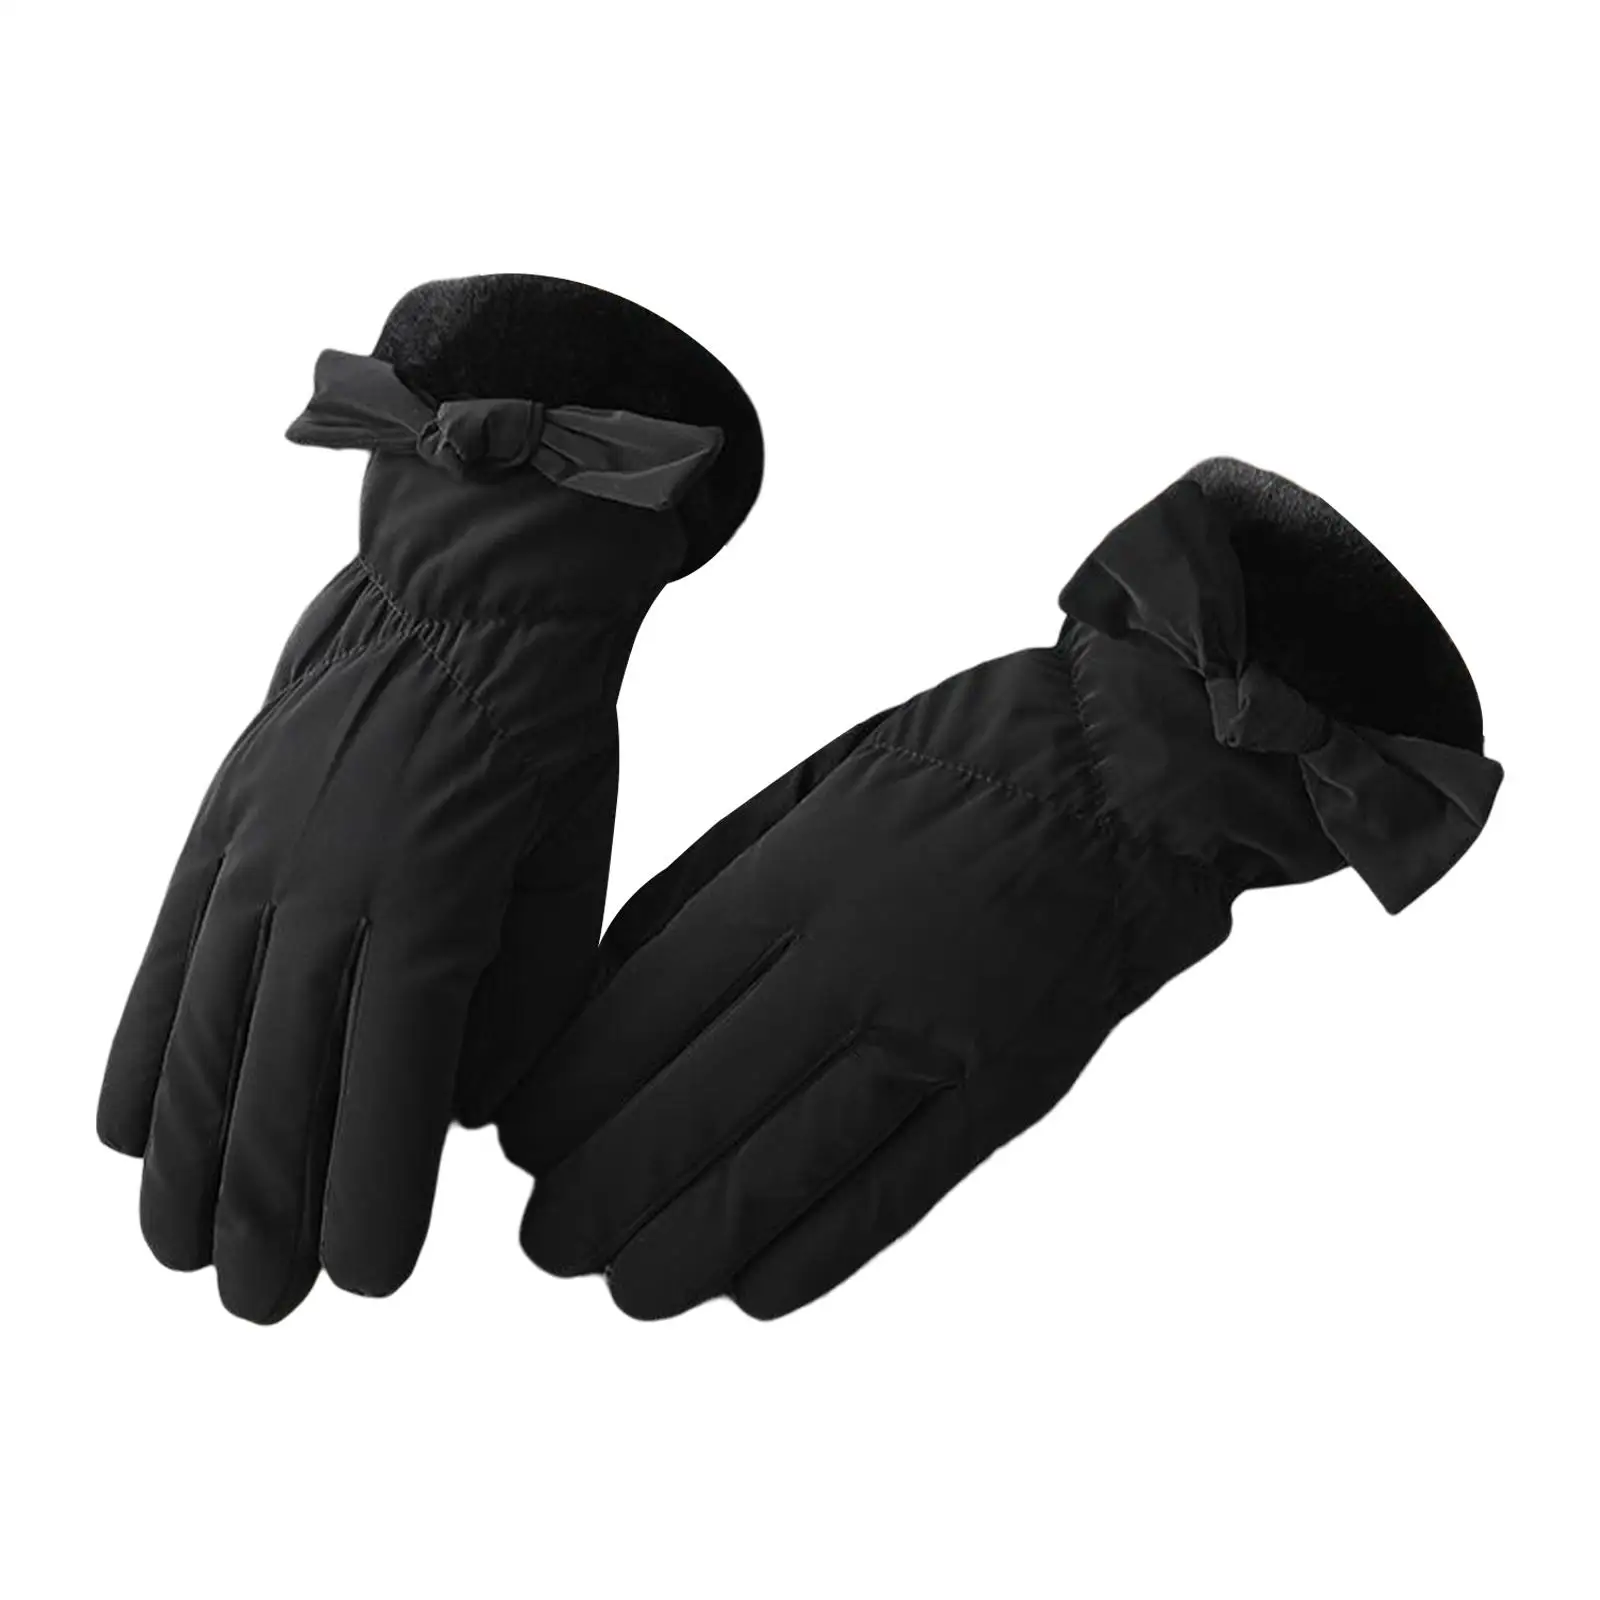 Womens Winter Warm Gloves with Screen Texting Fingers, Fleece Lined Windproof Gloves